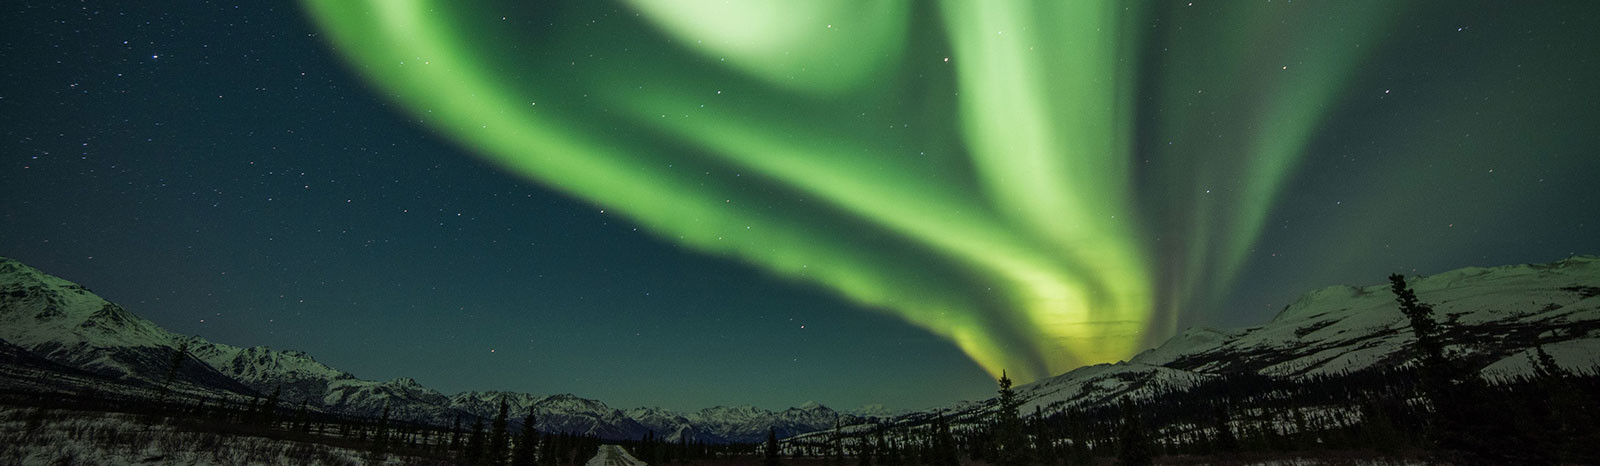 View of the Northern Lights in Alaska.